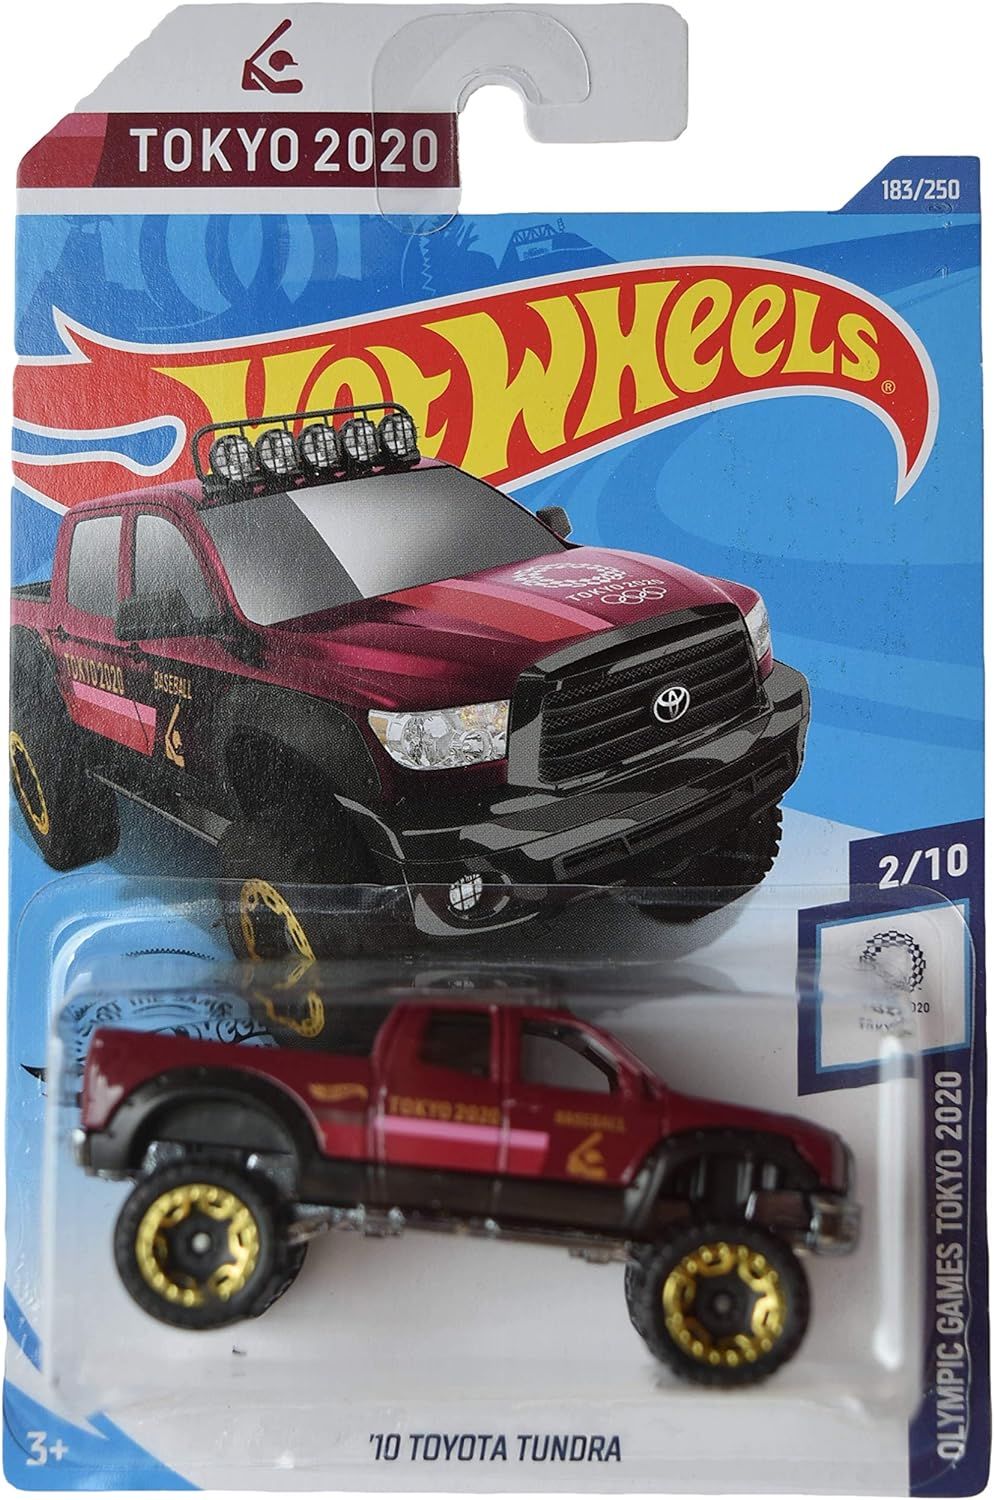 Hot Wheels - Olympic Games Tokyo 2020 (2/10) - \'10 Toyota Tundr